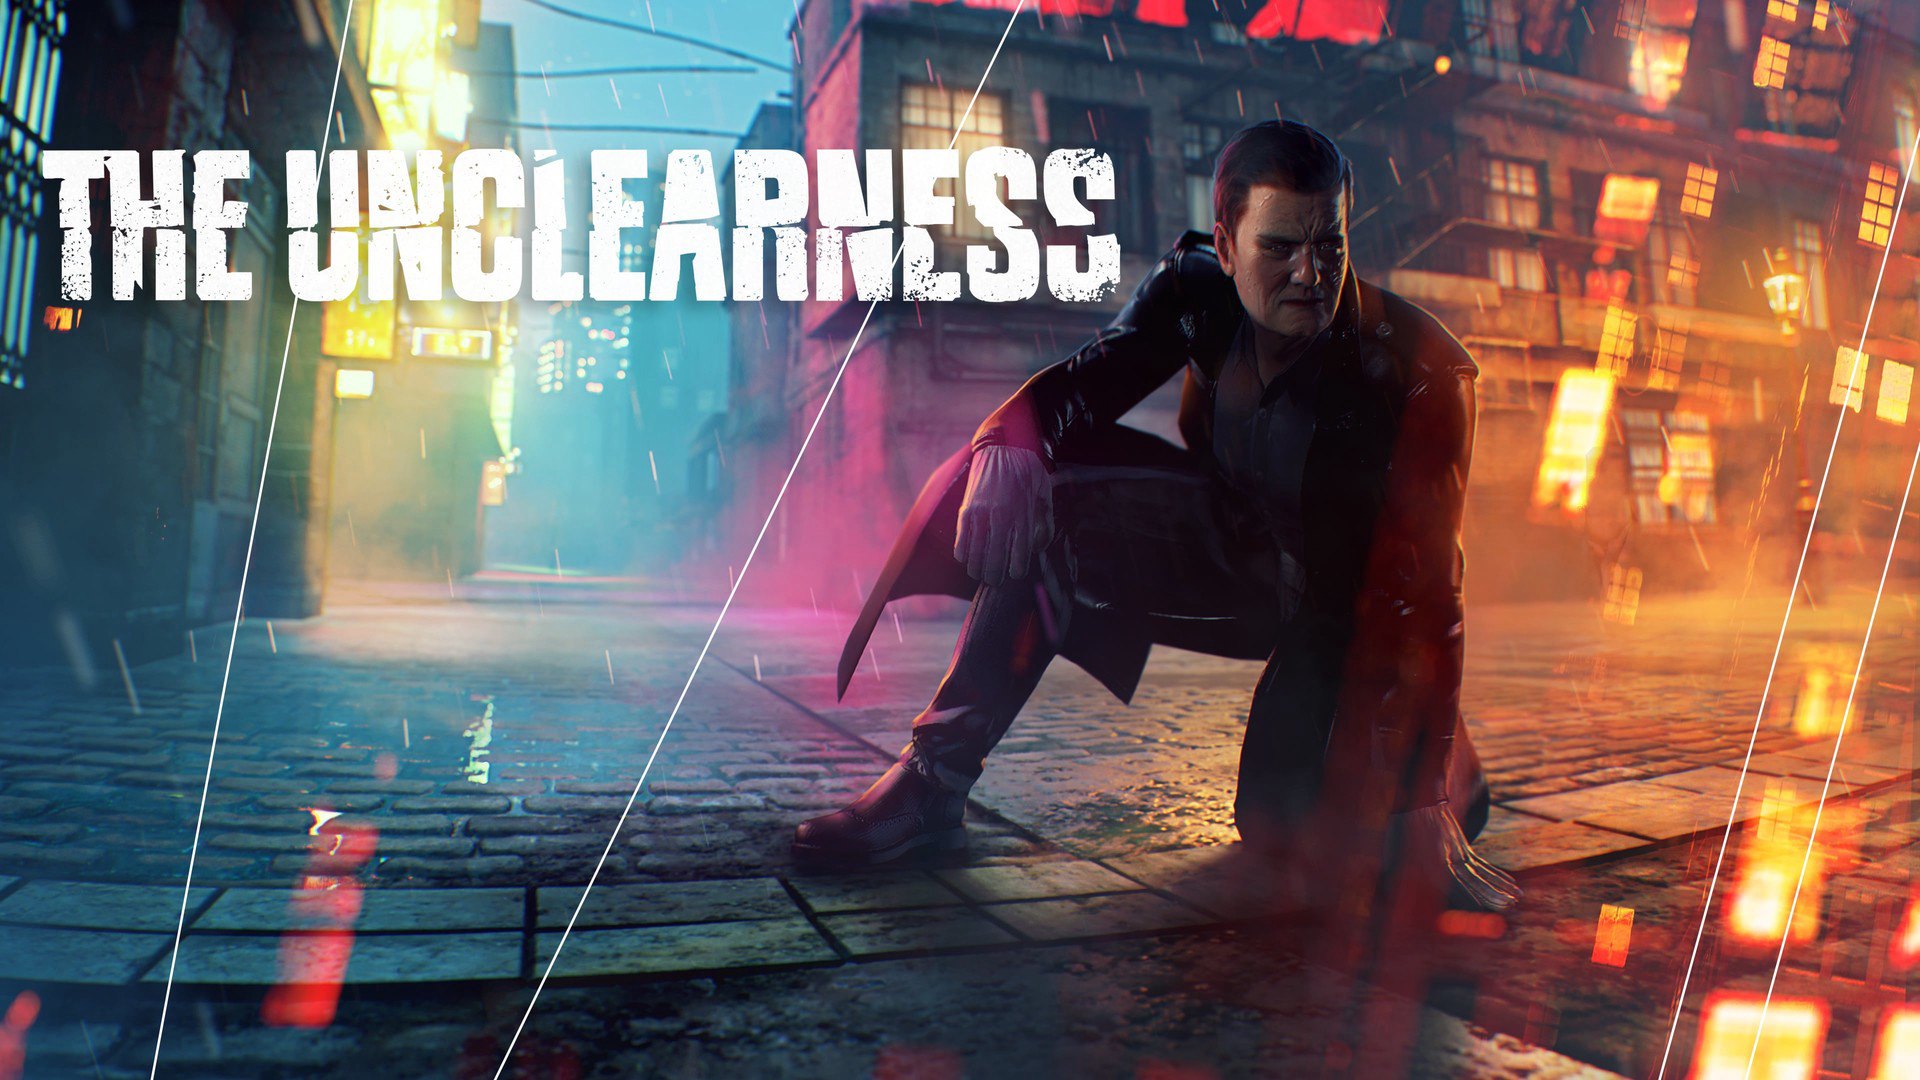 THE UNCLEARNESS Steam CD Key, 6.77 usd